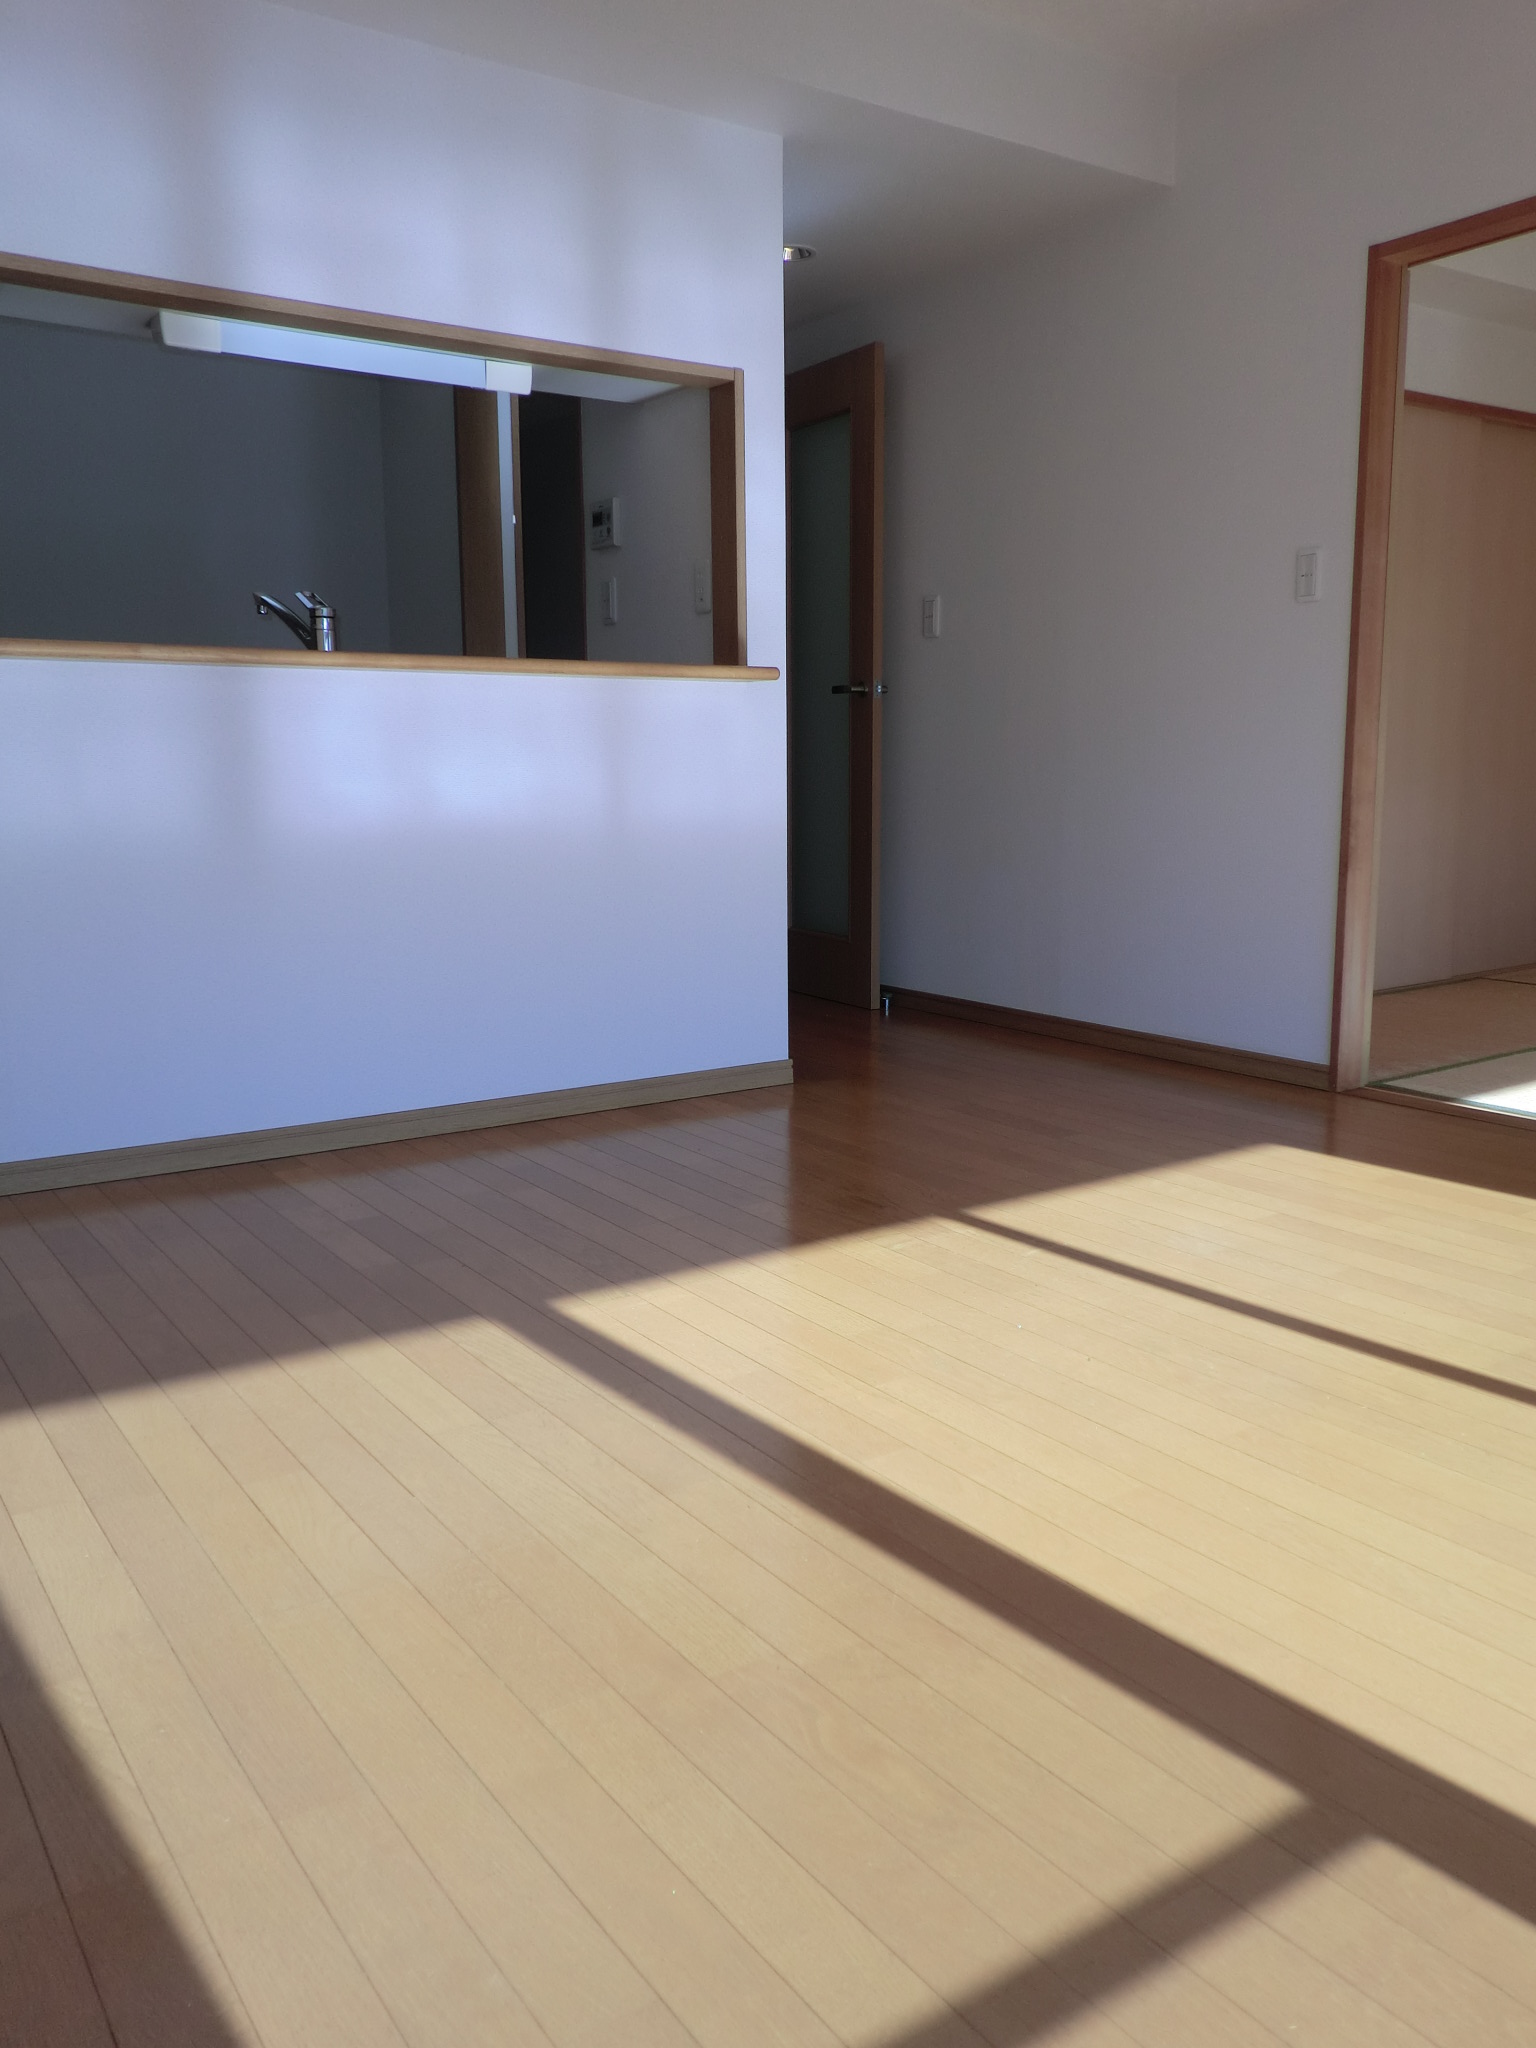 Living and room. LD(1)  The same type ・ It will be in a separate dwelling unit photos.